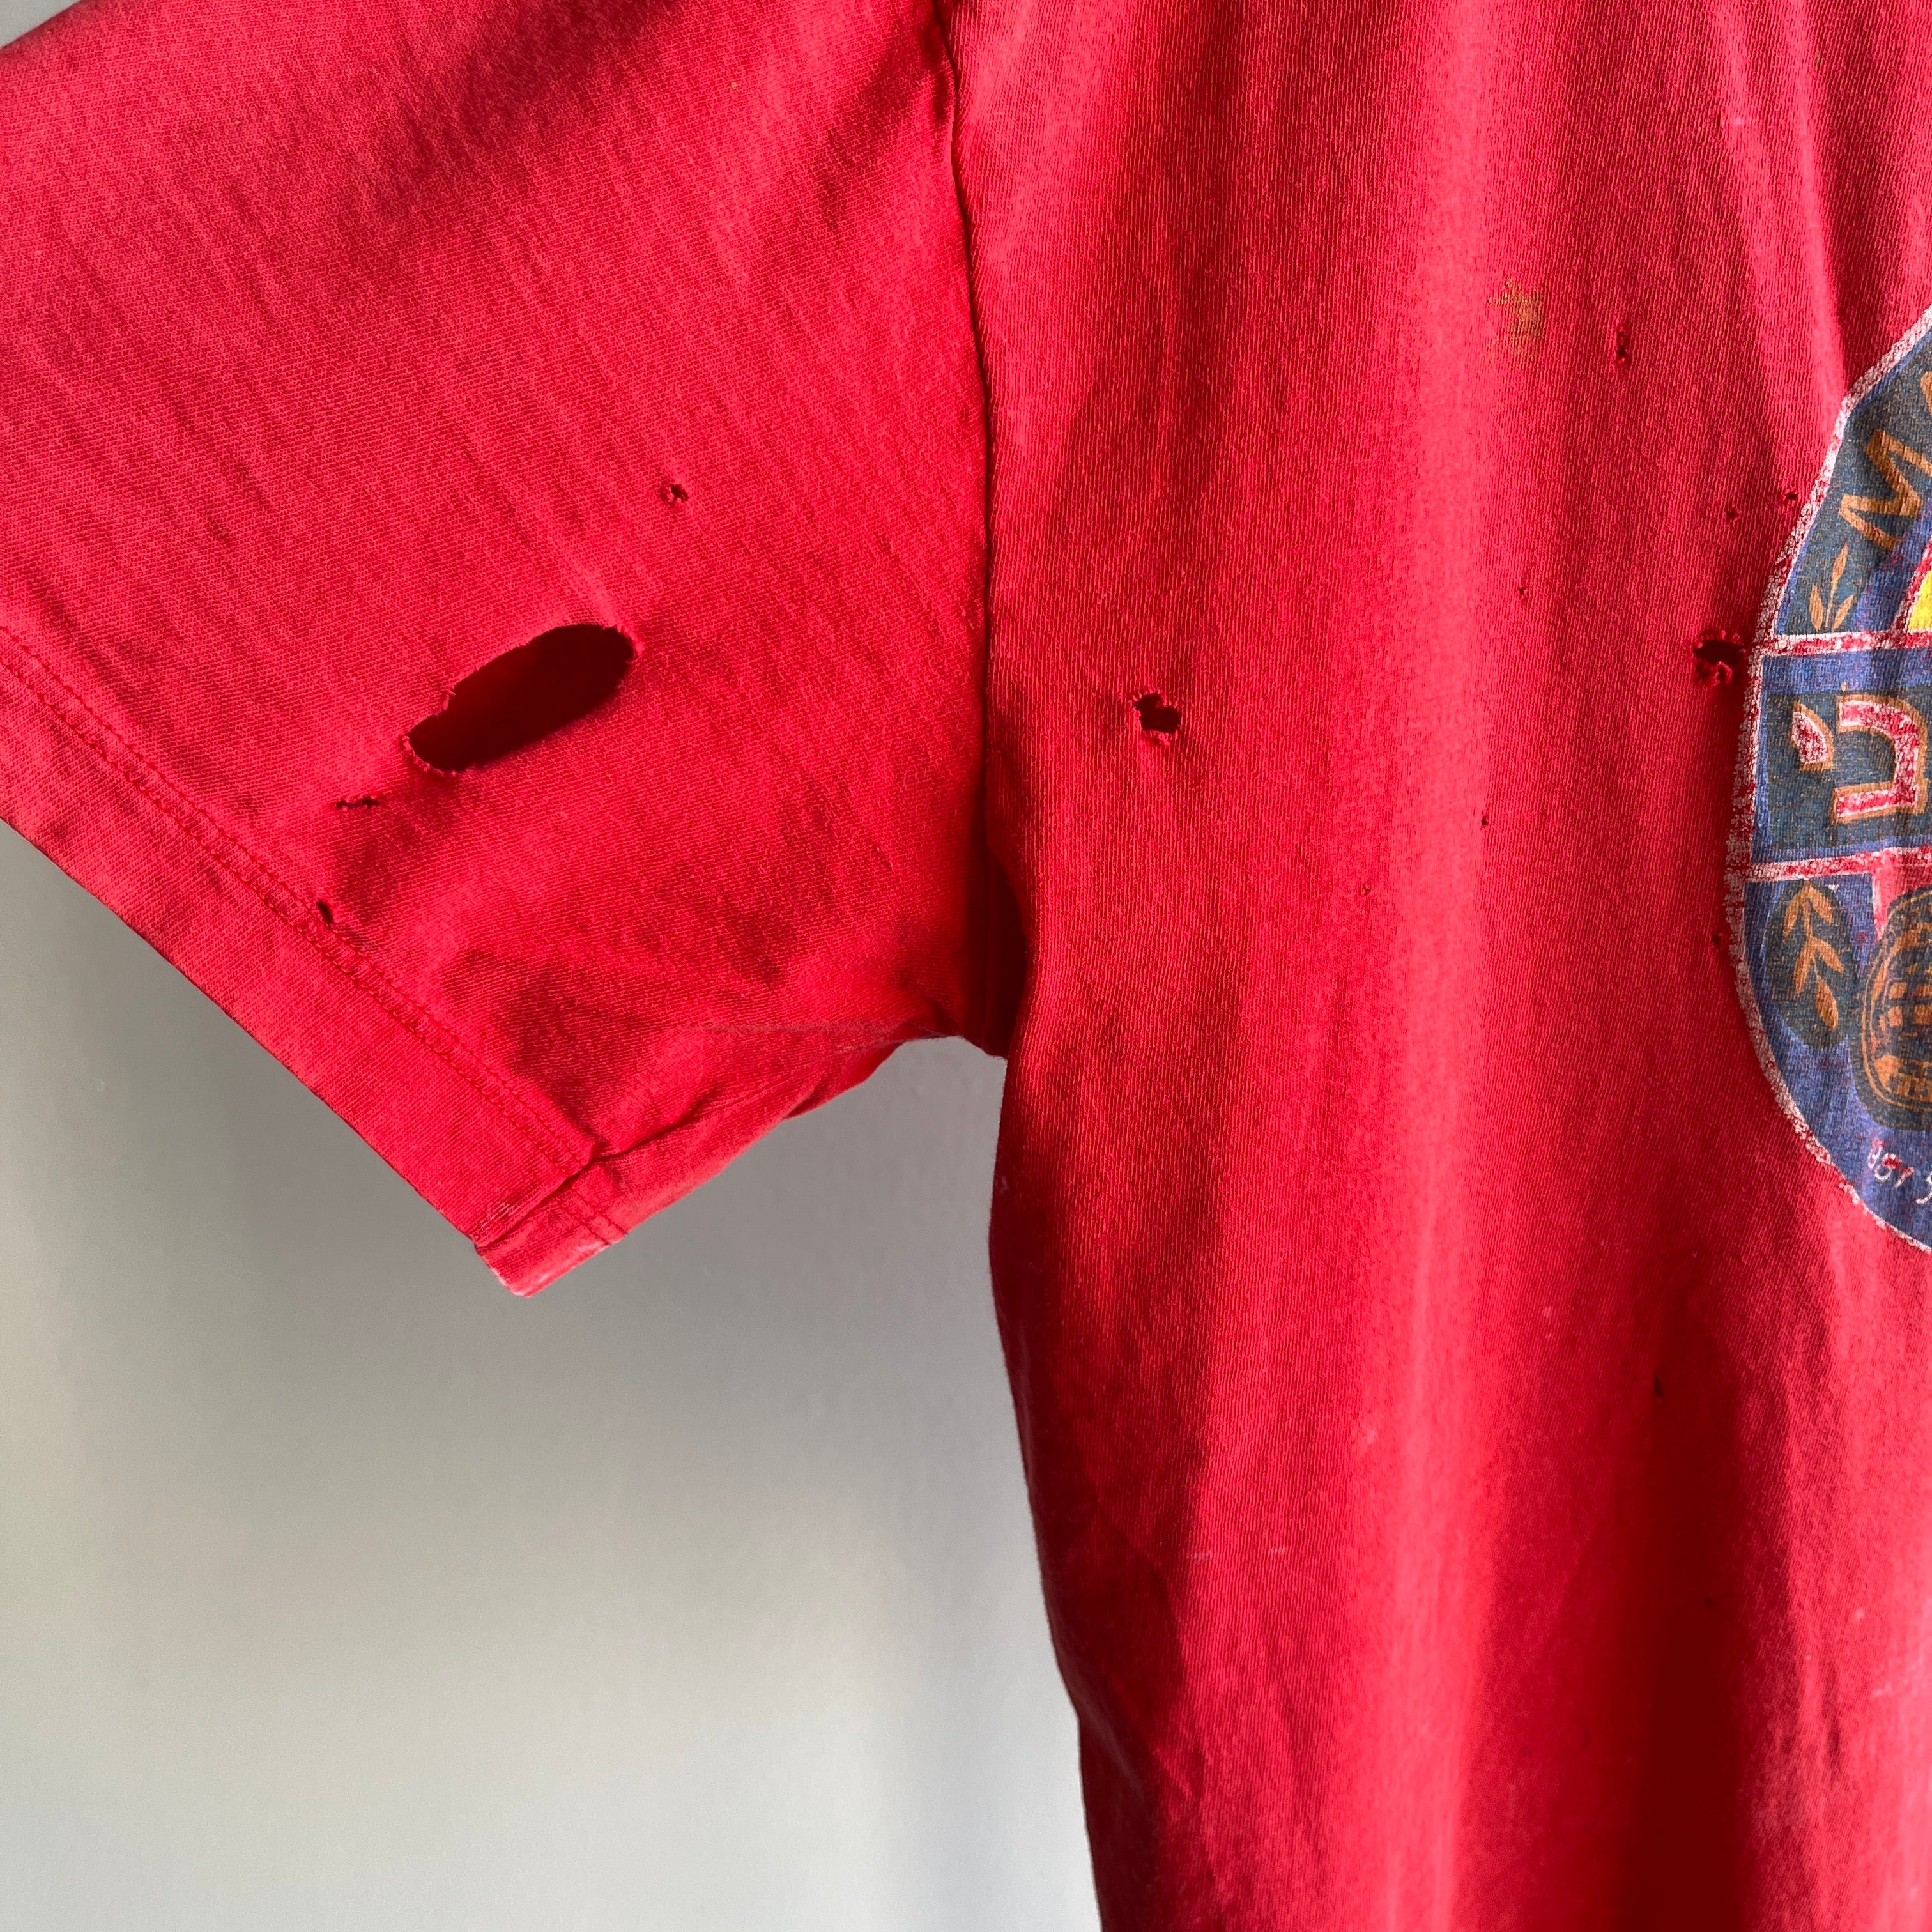 1990s Maccabbe Beer Utterly Thrashed and Sun Faded T-Shirt